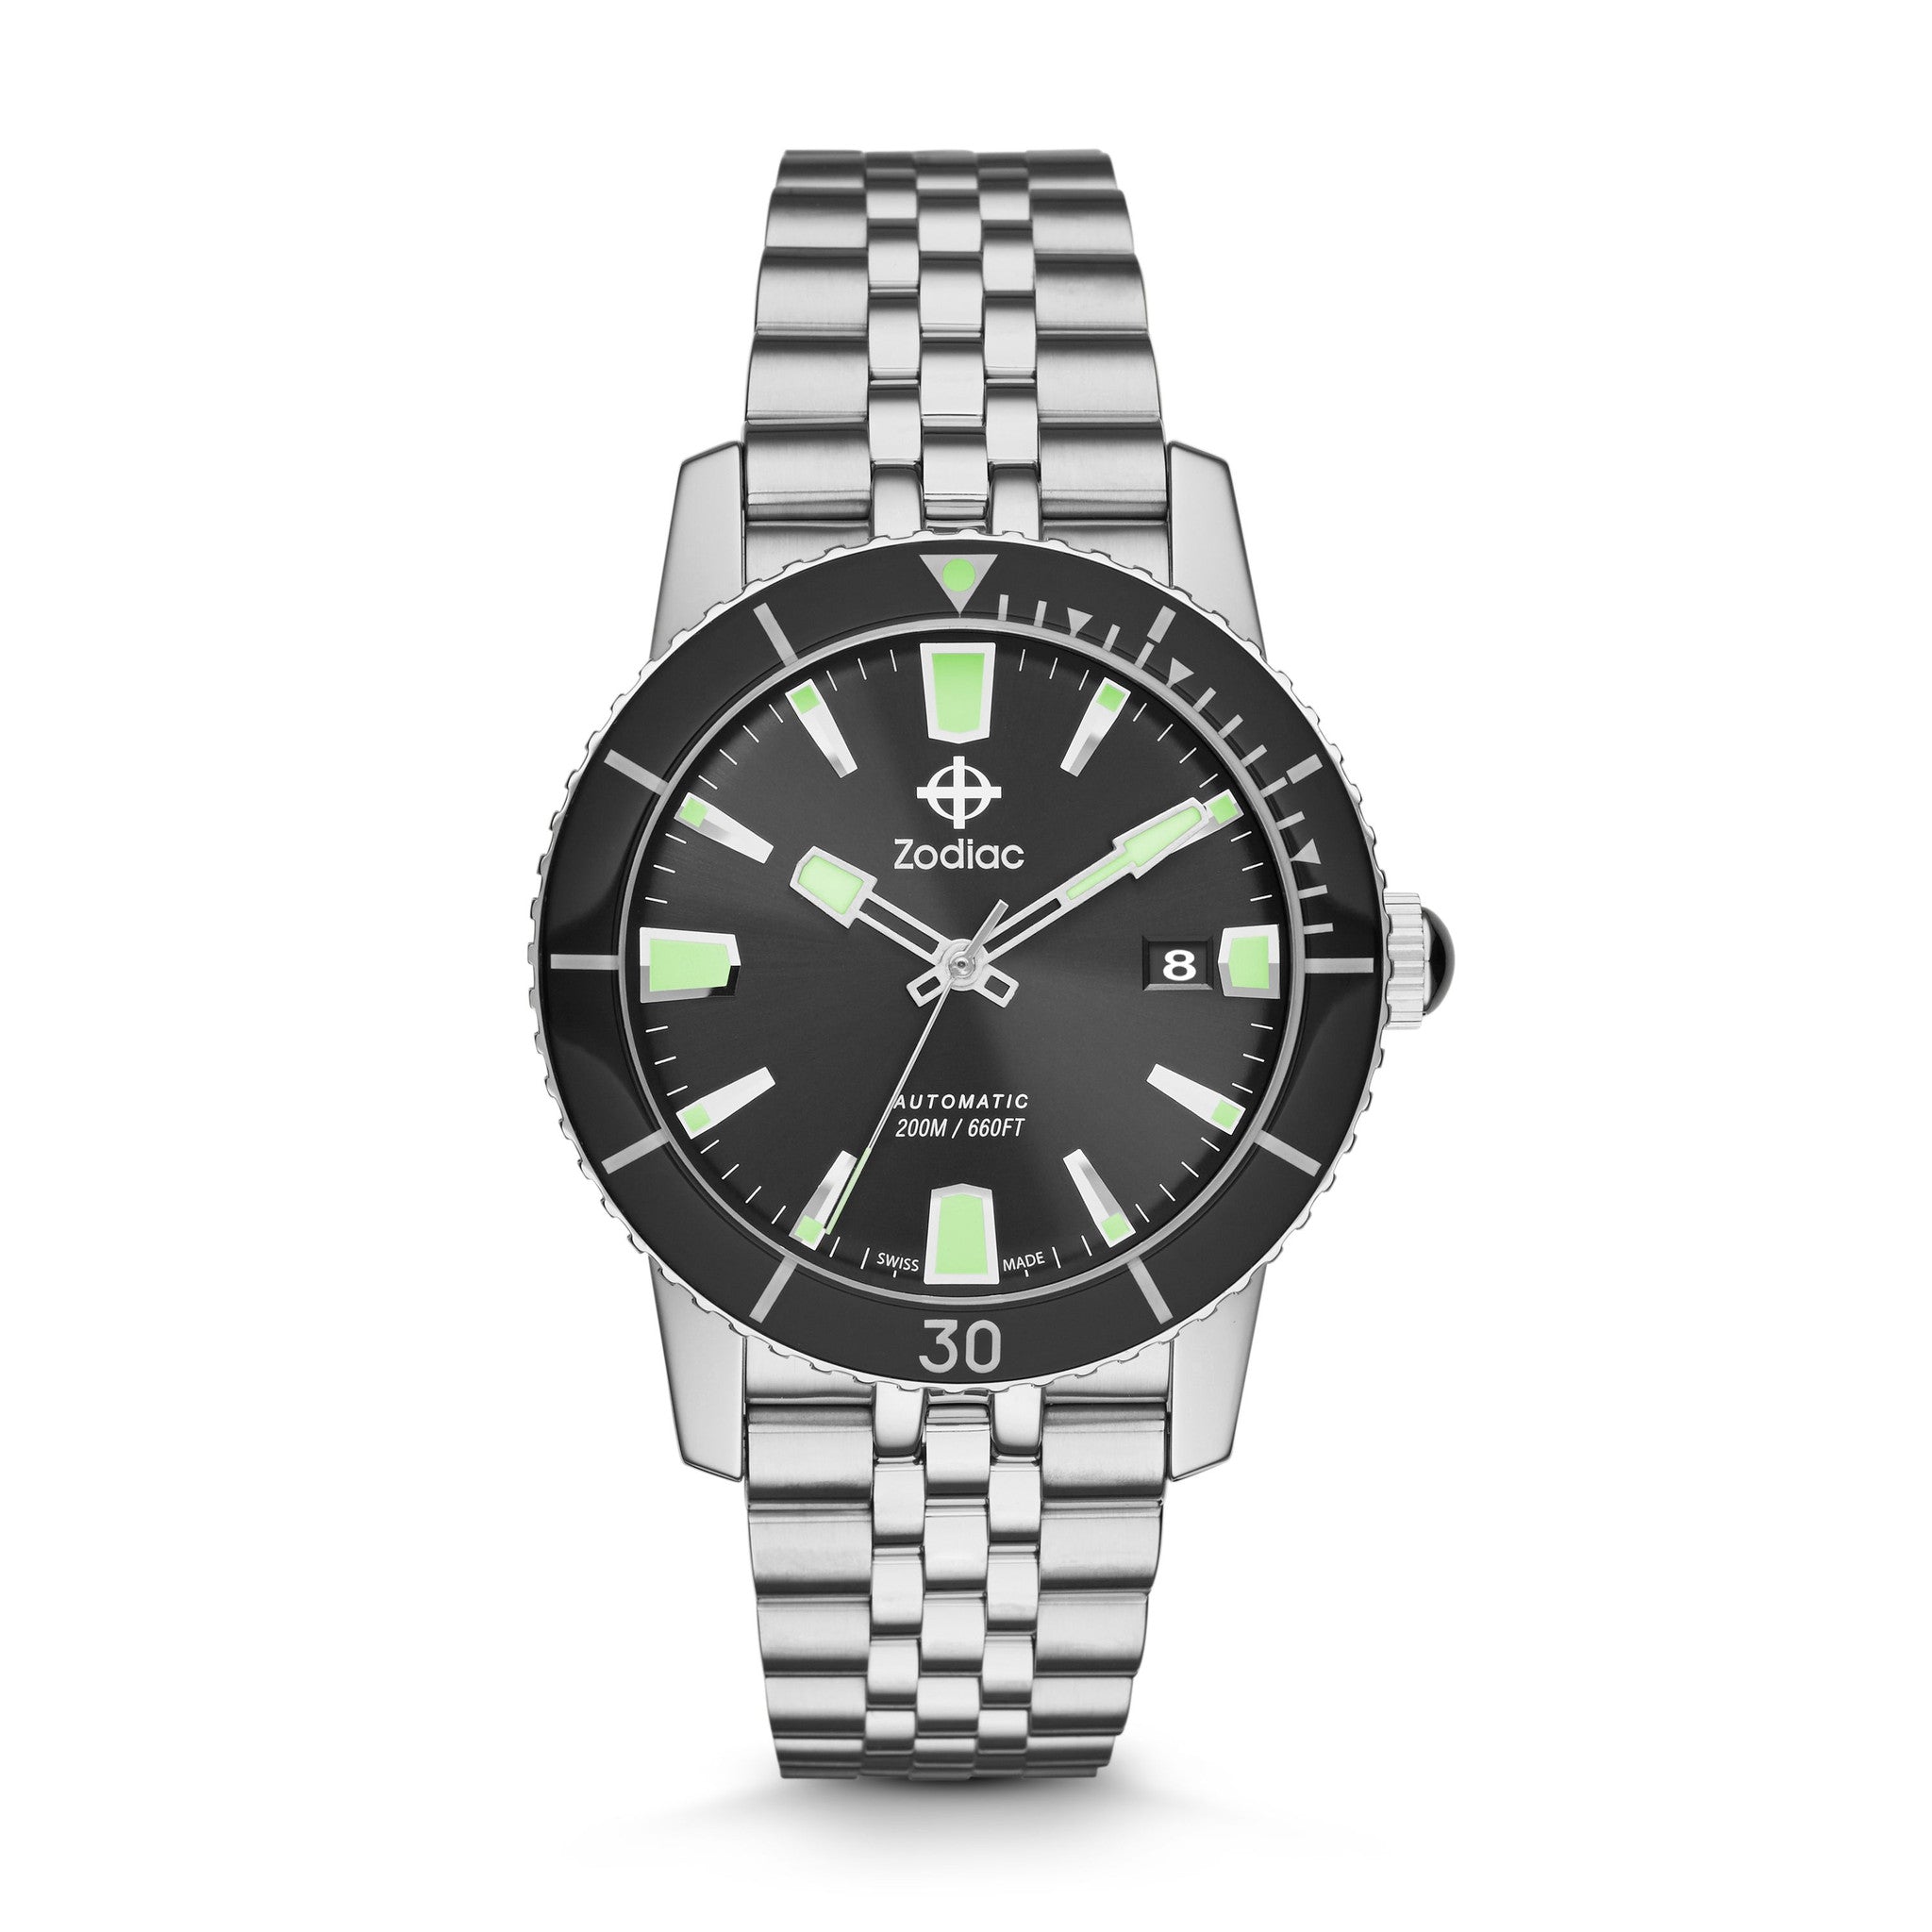 SUPER SEA WOLF 53 COMPRESSION AUTOMATIC STAINLESS STEEL WATCH â Zodiac  Watches